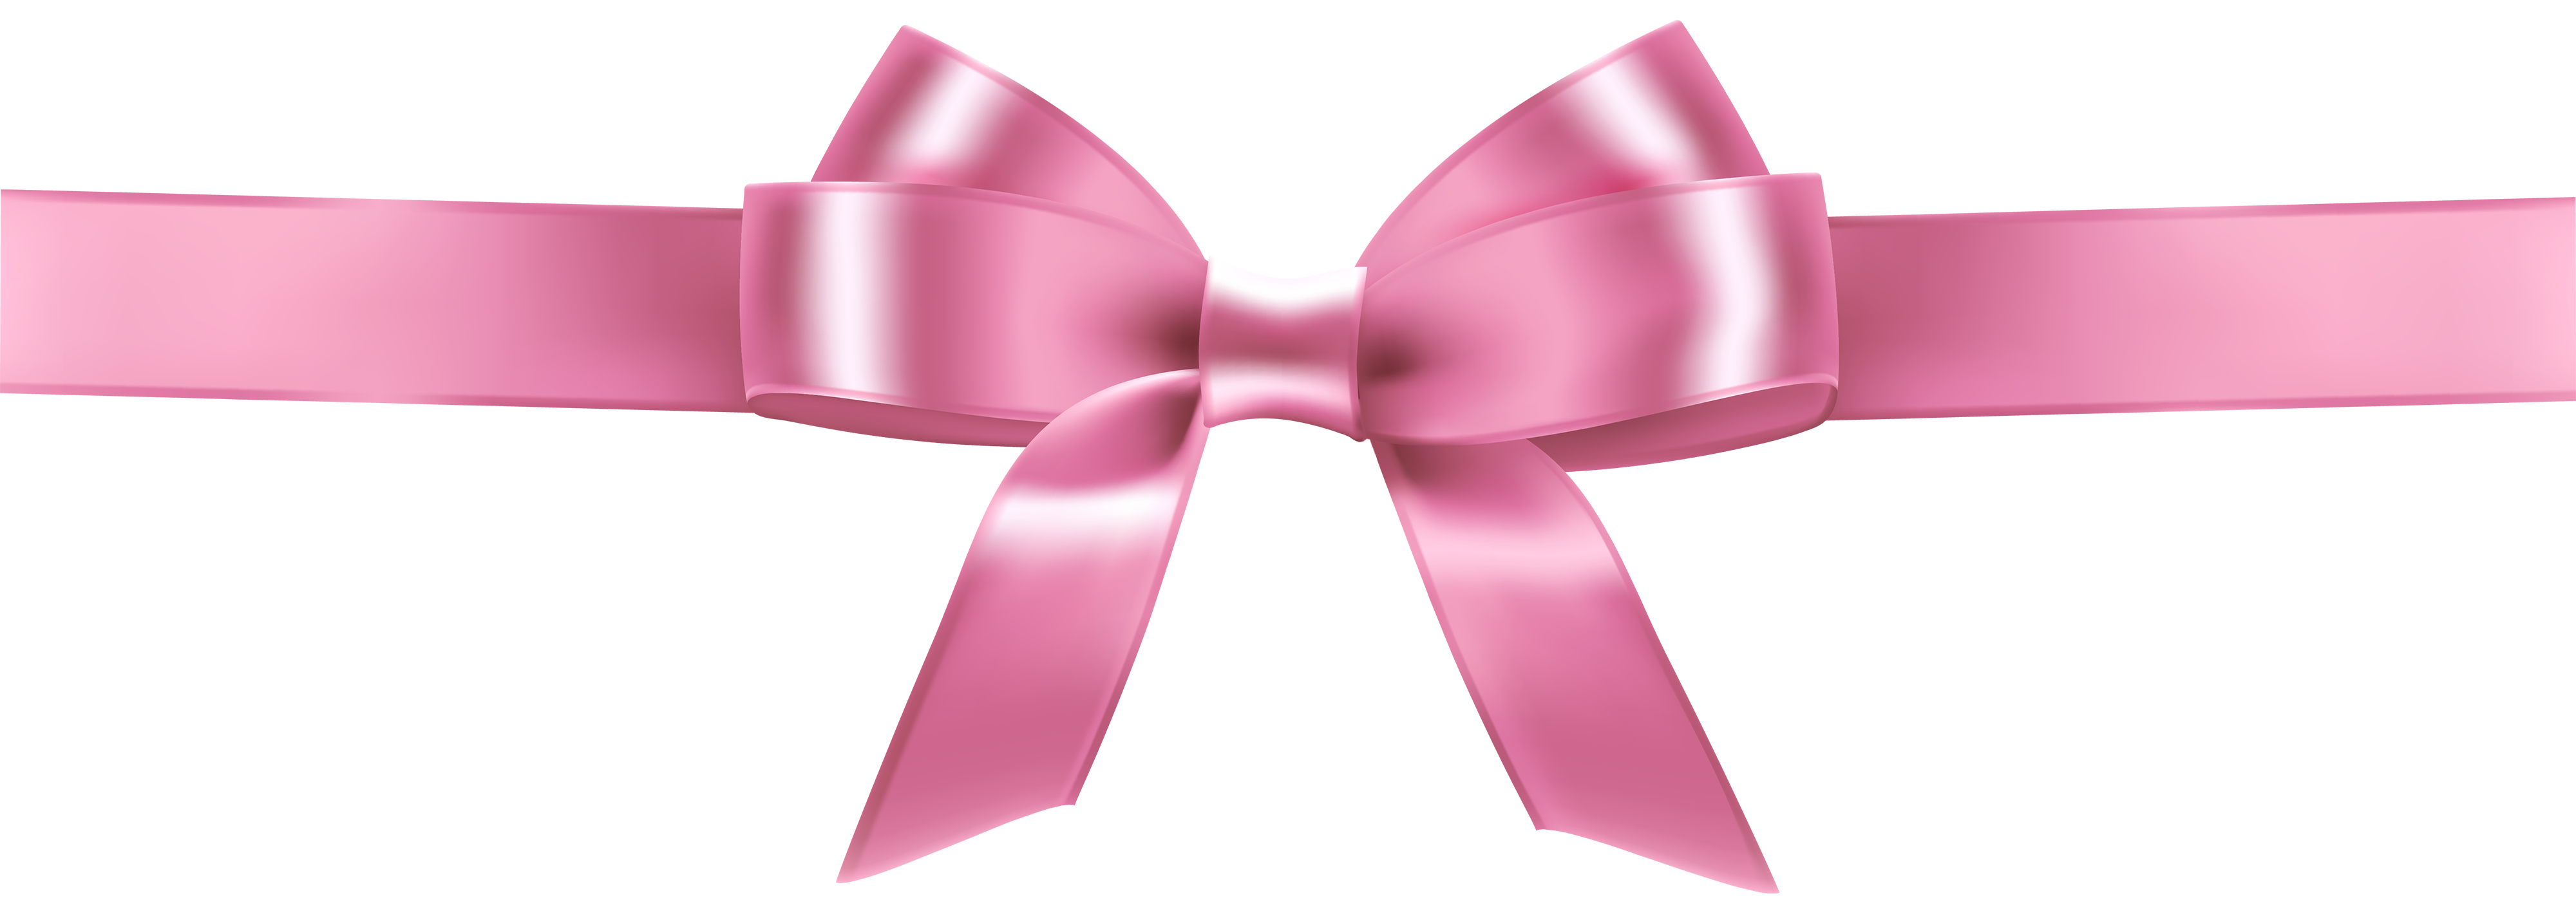 Ribbon Bow Clipart Transparent Background Image For Pink. Snowjet.co